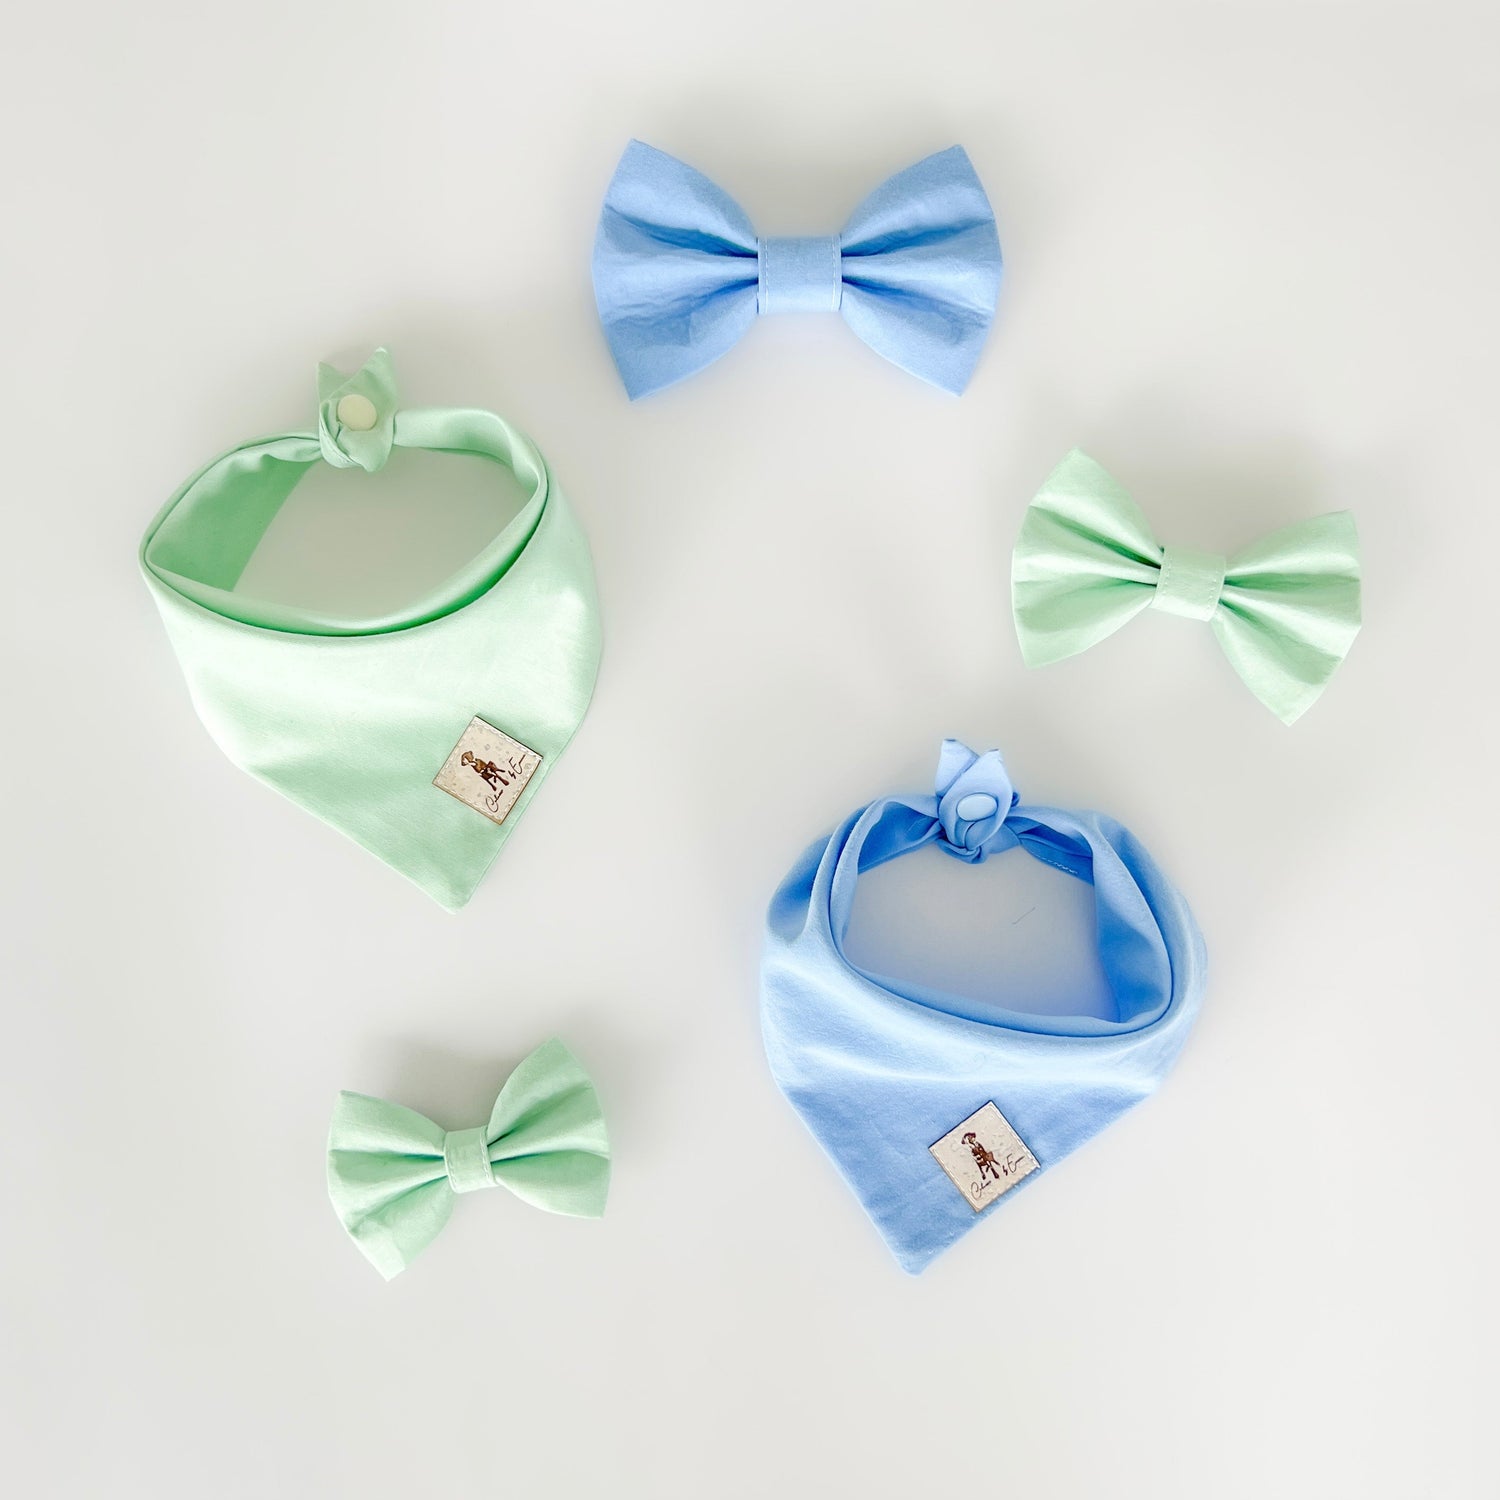 Pastel blue and mint green dog bandanas and dog bows by Colours By Emma laid out onto a white table